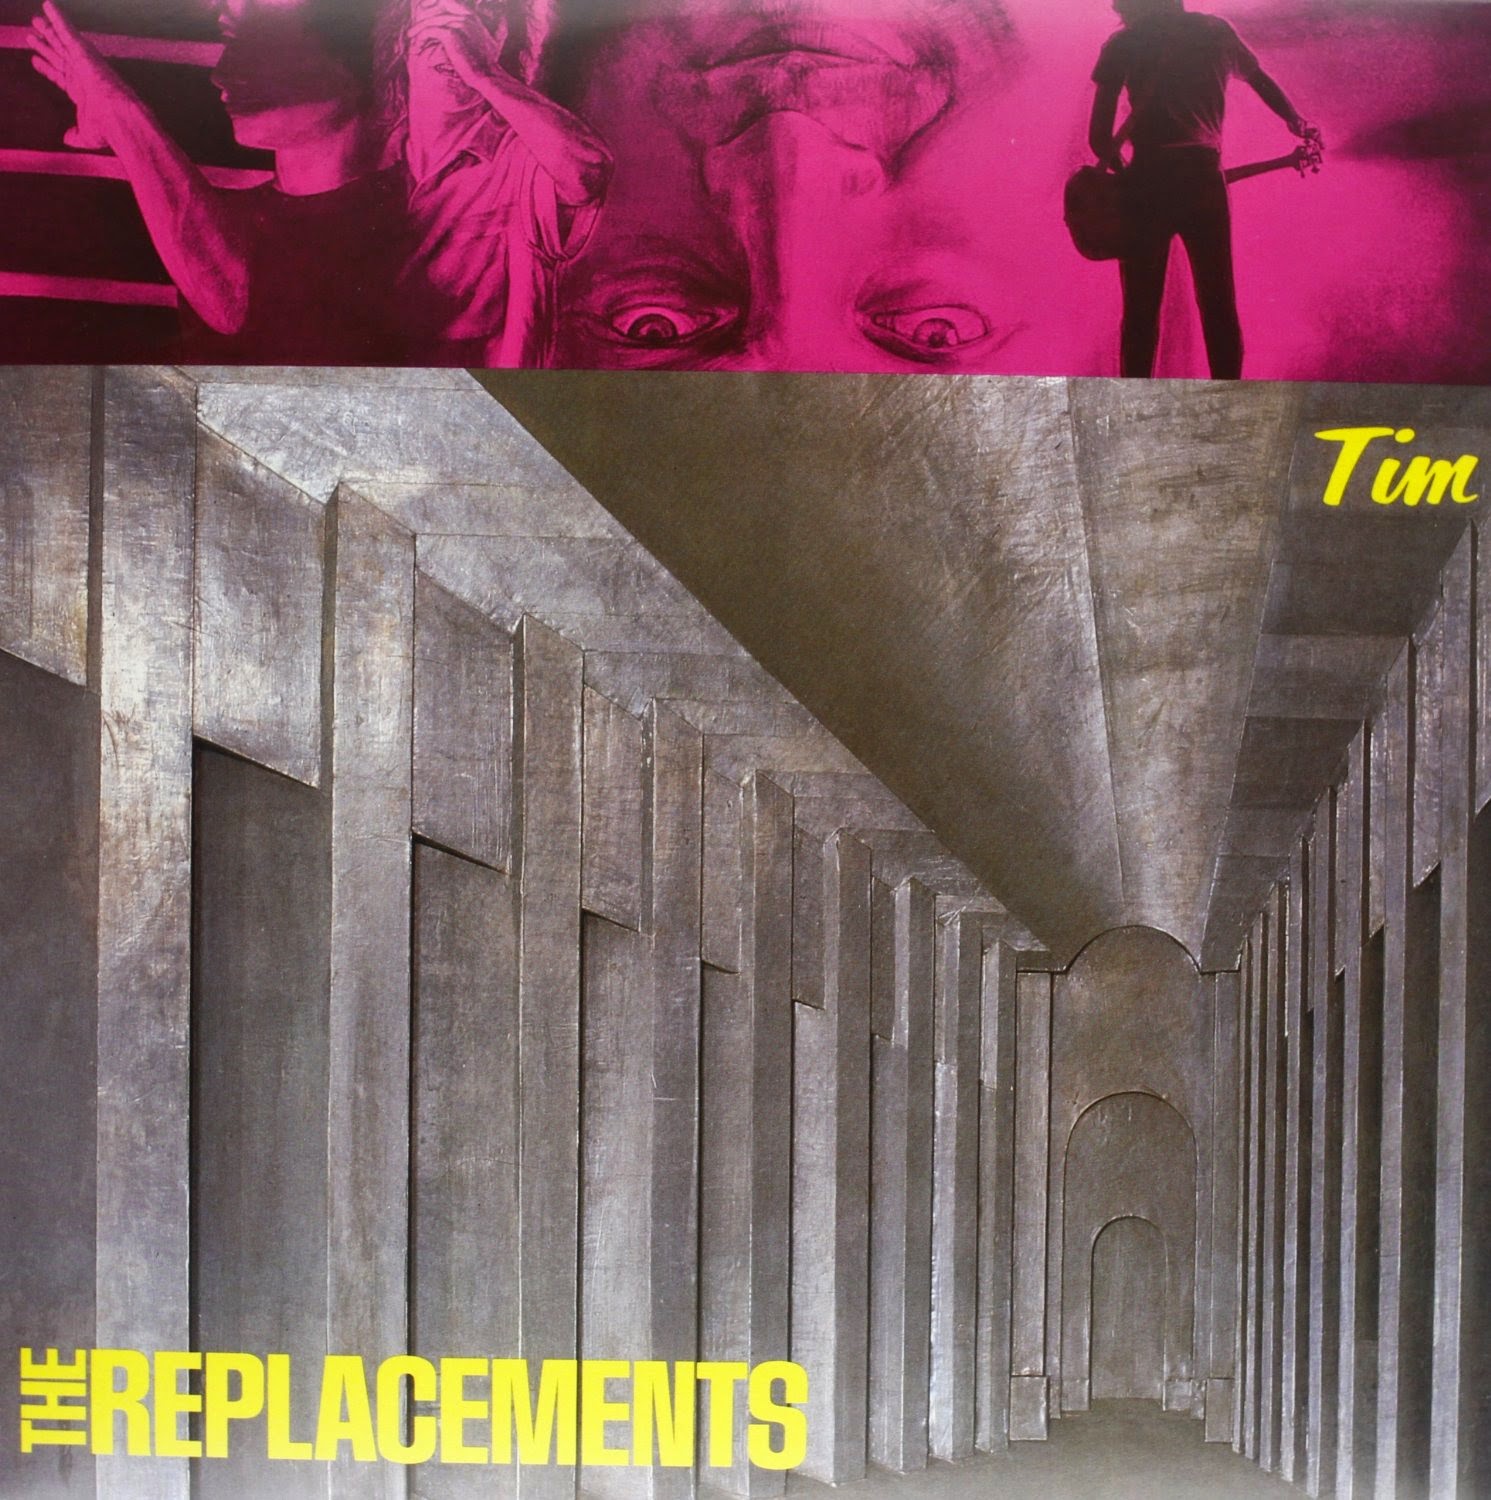 The Replacements "Tim" LP